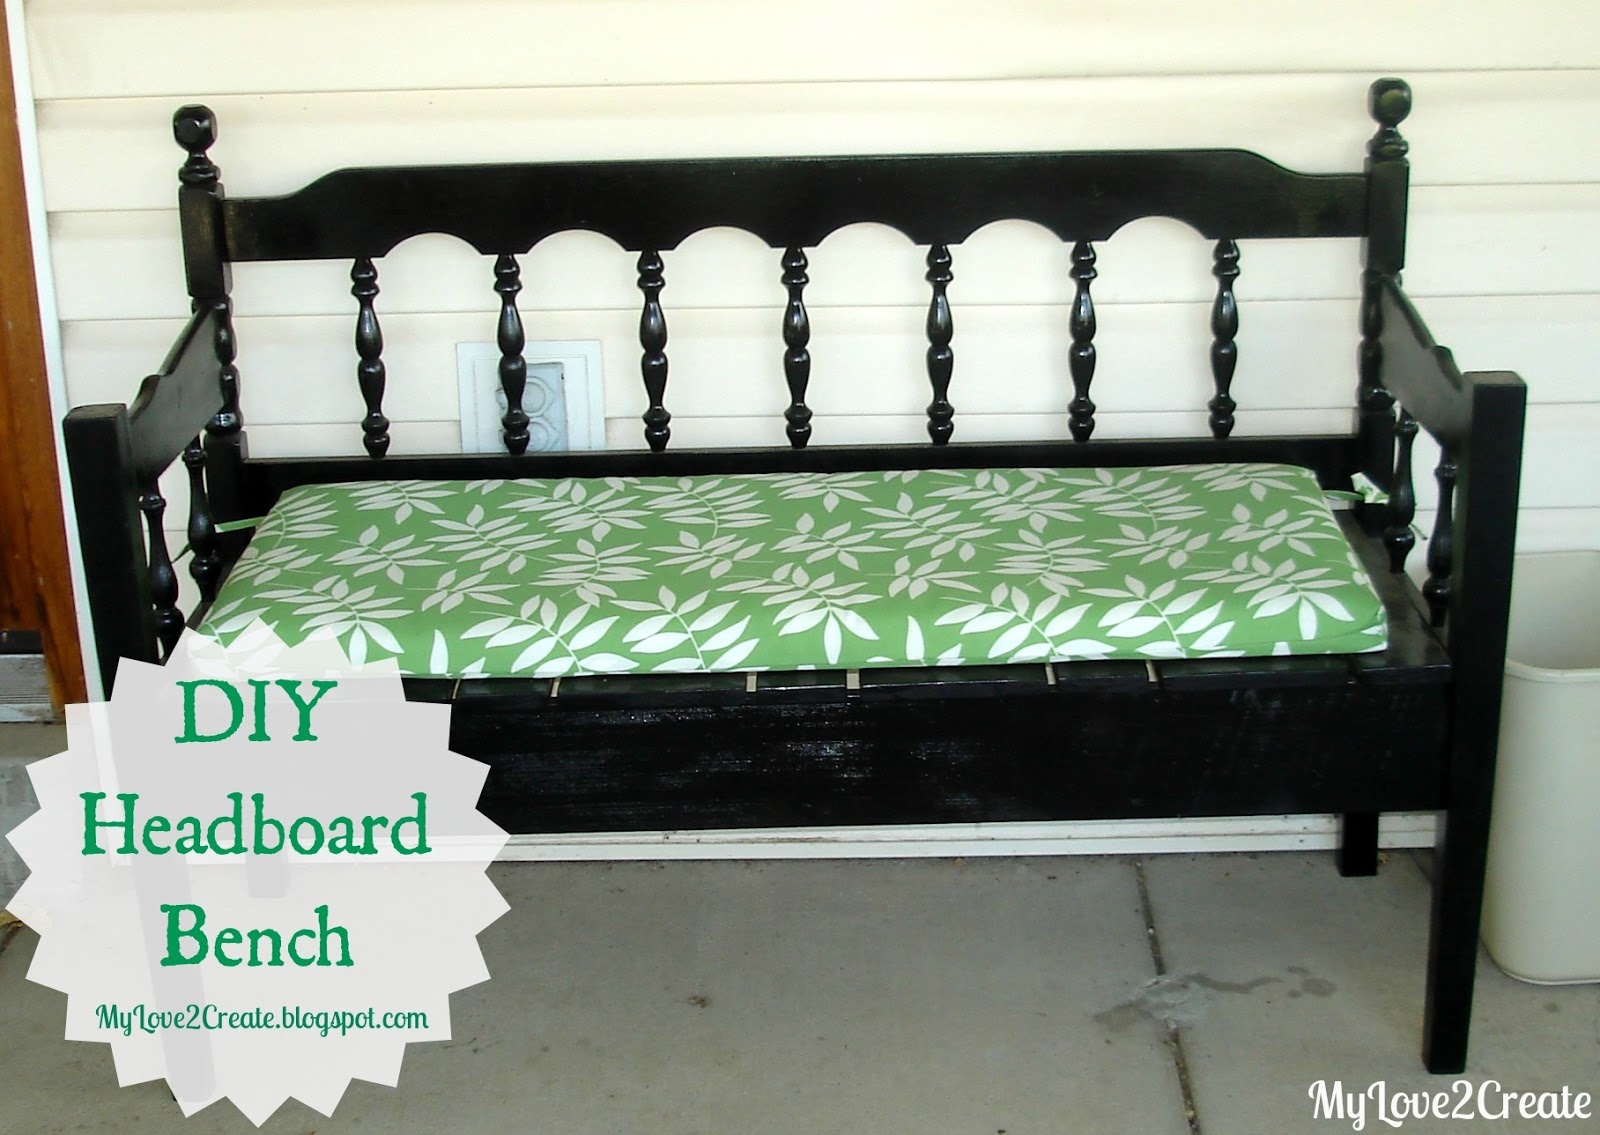 the referred plans or diy Puzzle My as headboard bench 2  to Love Bench,  Bench   loving Headboard